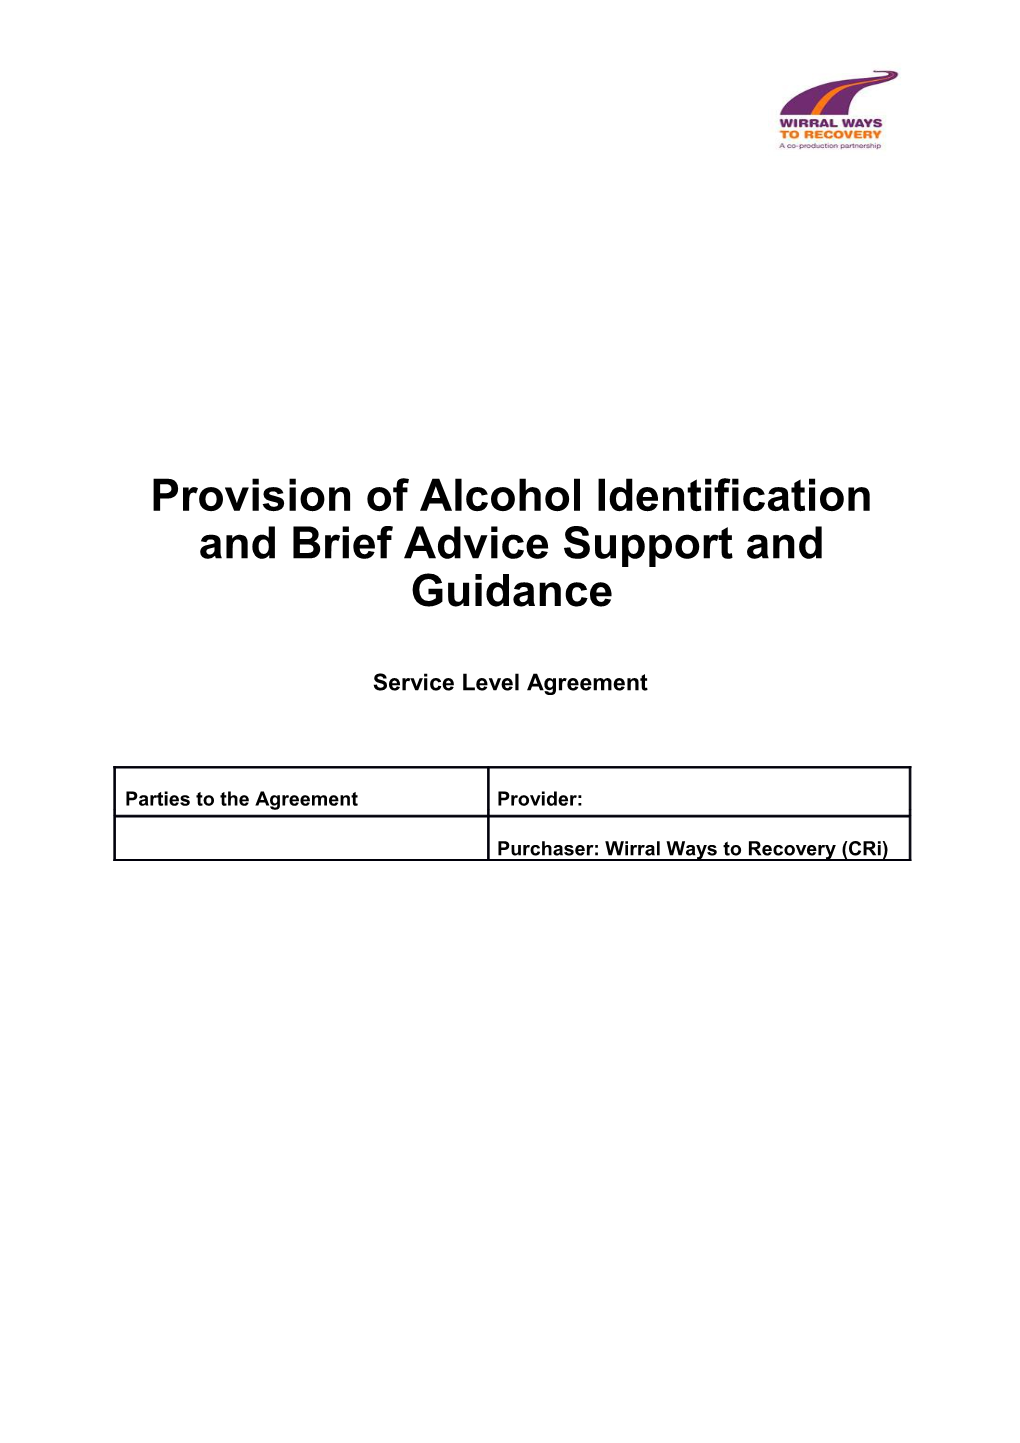 Provision of Alcohol Identification and Brief Advice Support and Guidance